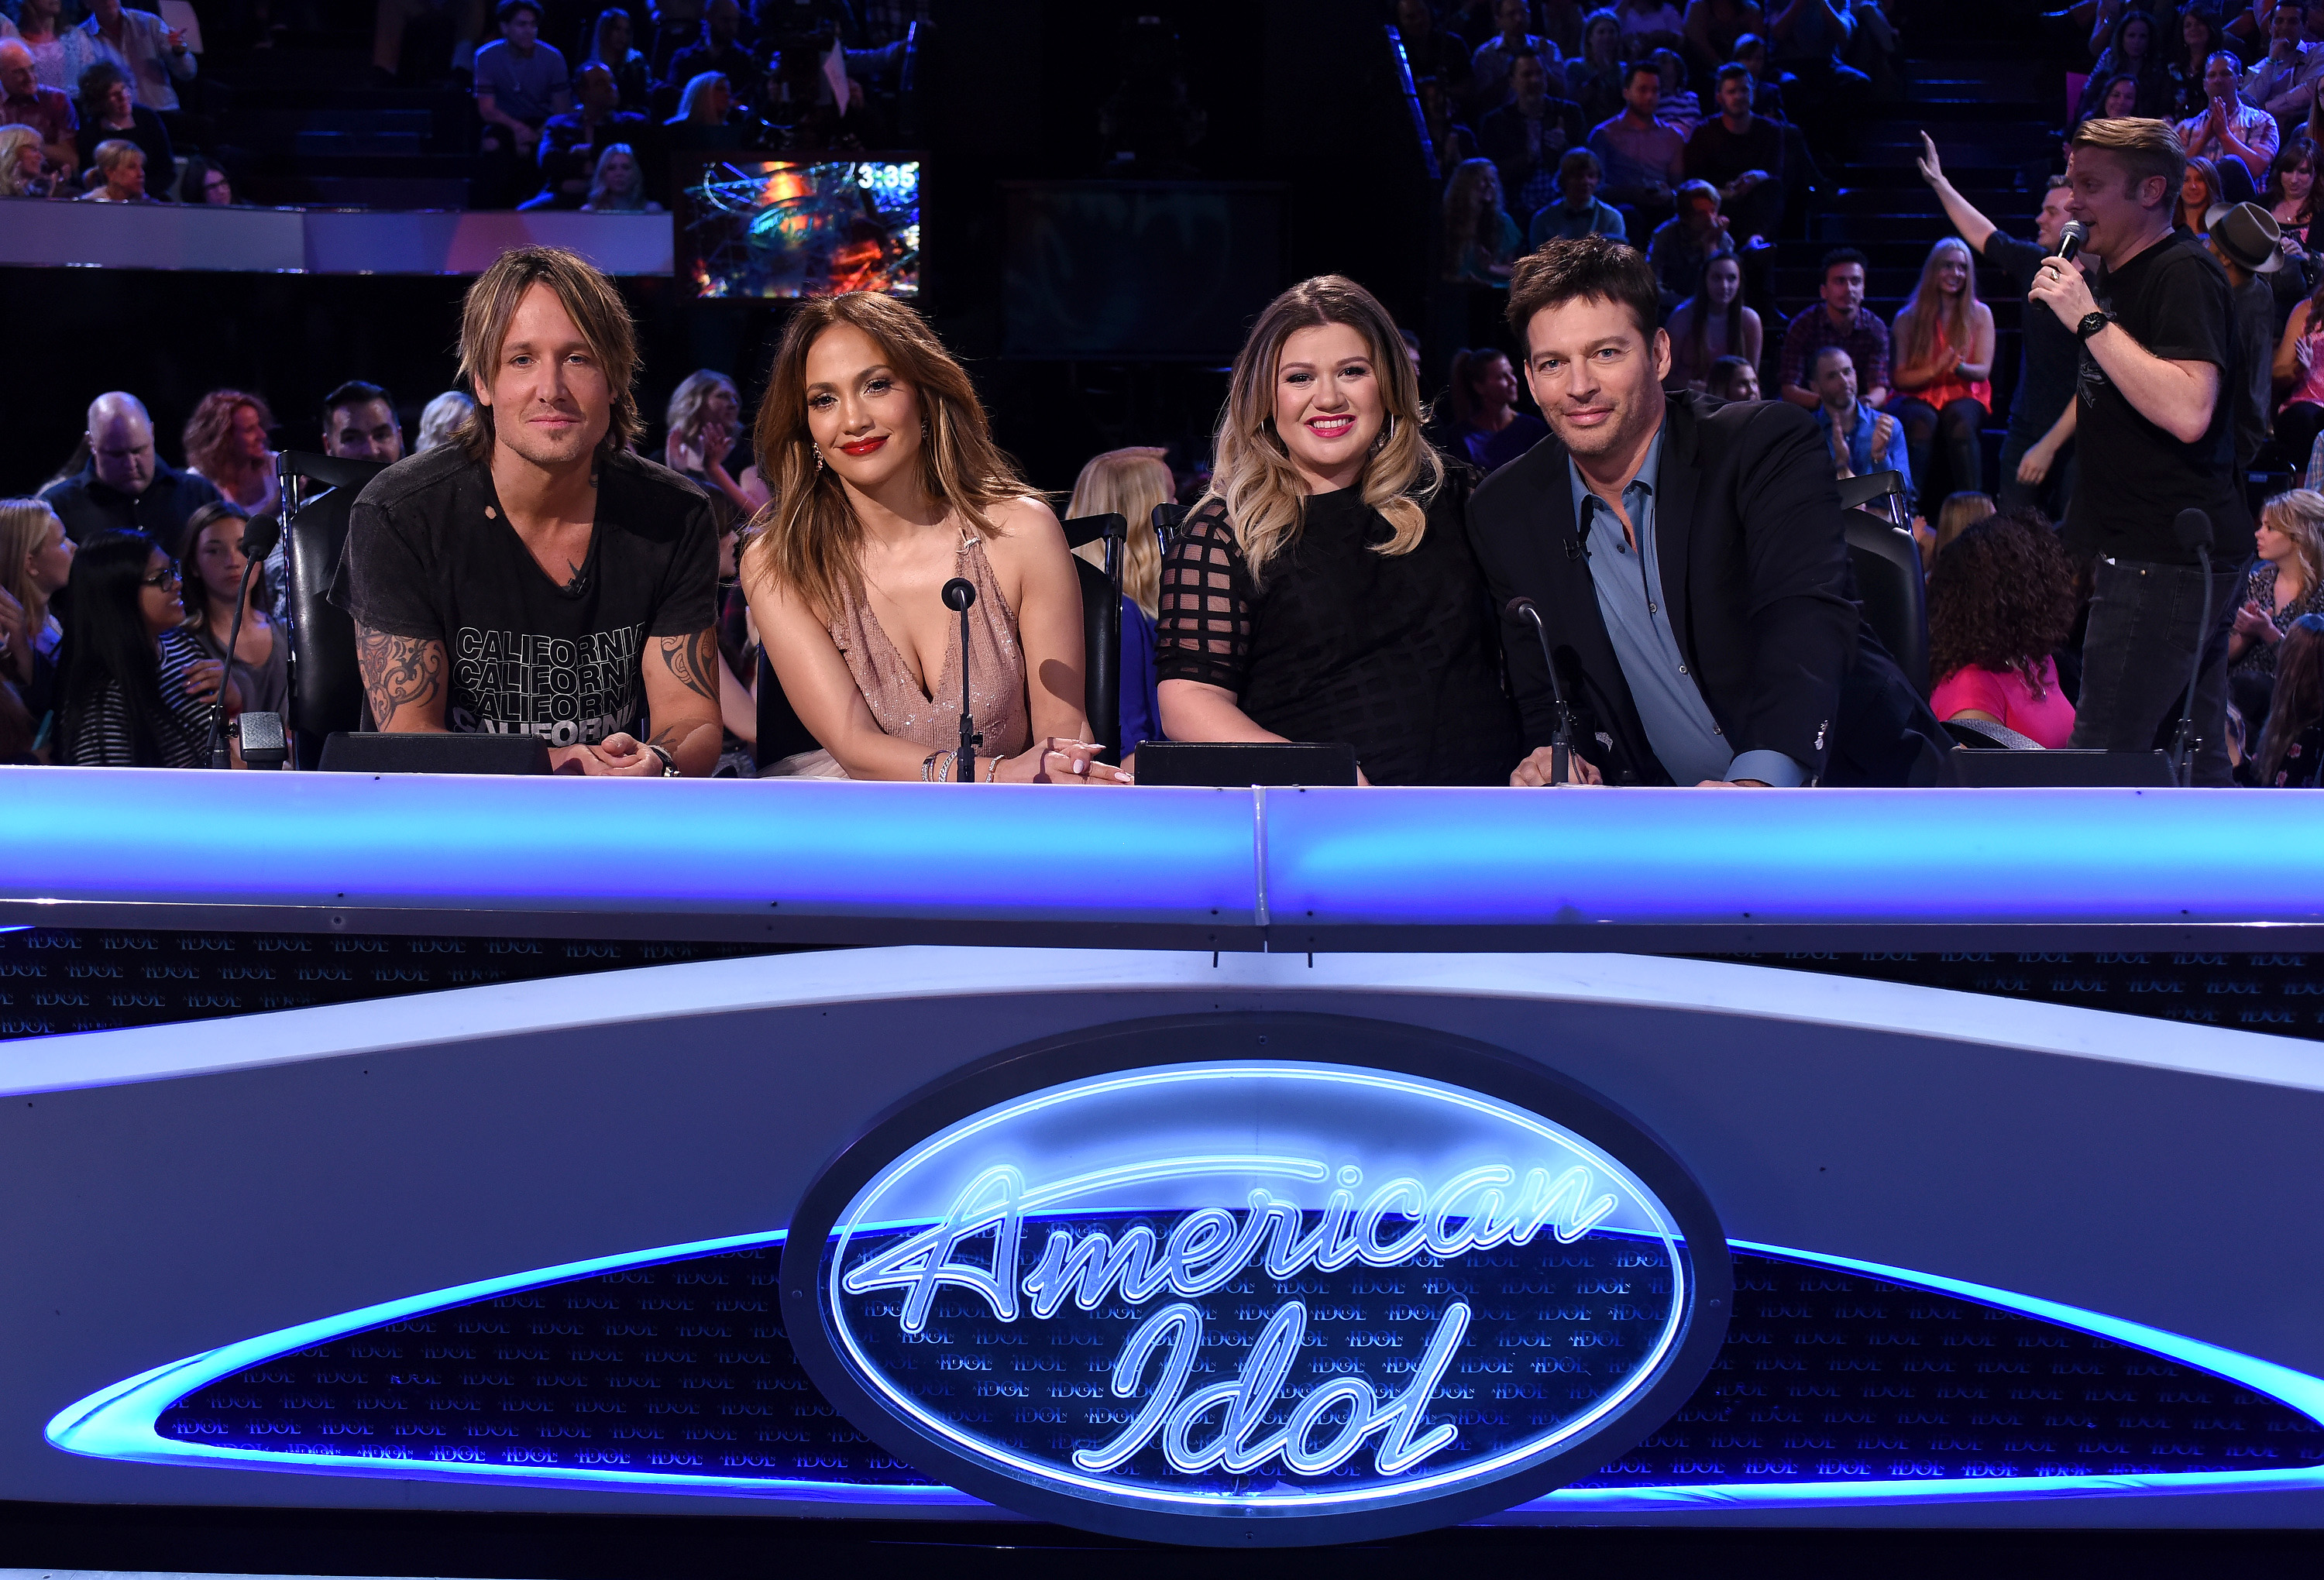 Keith Urban, Jennifer Lopez, Kelly Clarkson, and Harry Connick Jr. onstage at FOX's American Idol Season 15 on February 25, 2016 in Hollywood, California | Source: Getty Images